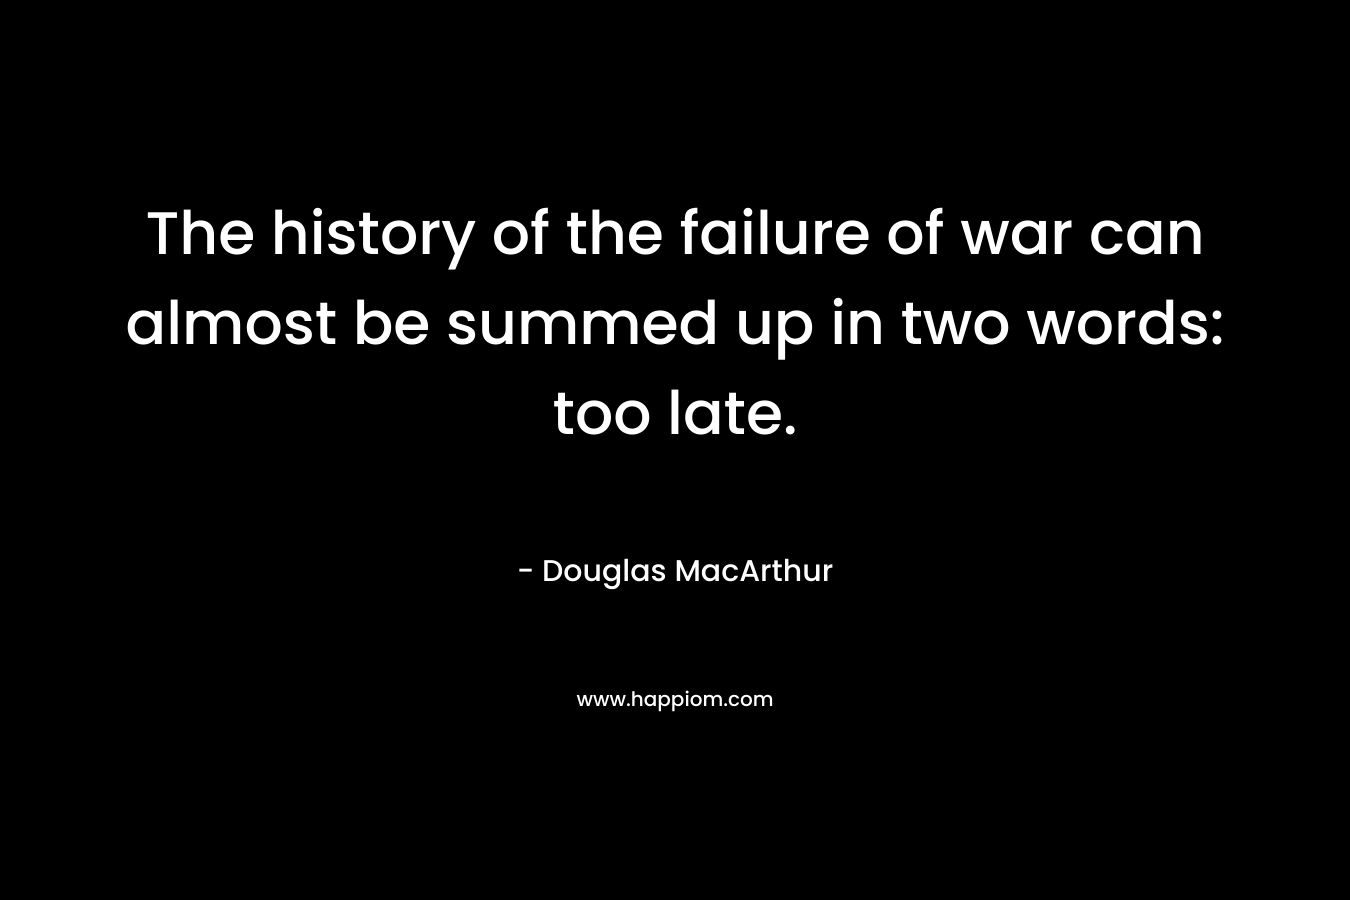 The history of the failure of war can almost be summed up in two words: too late. – Douglas MacArthur